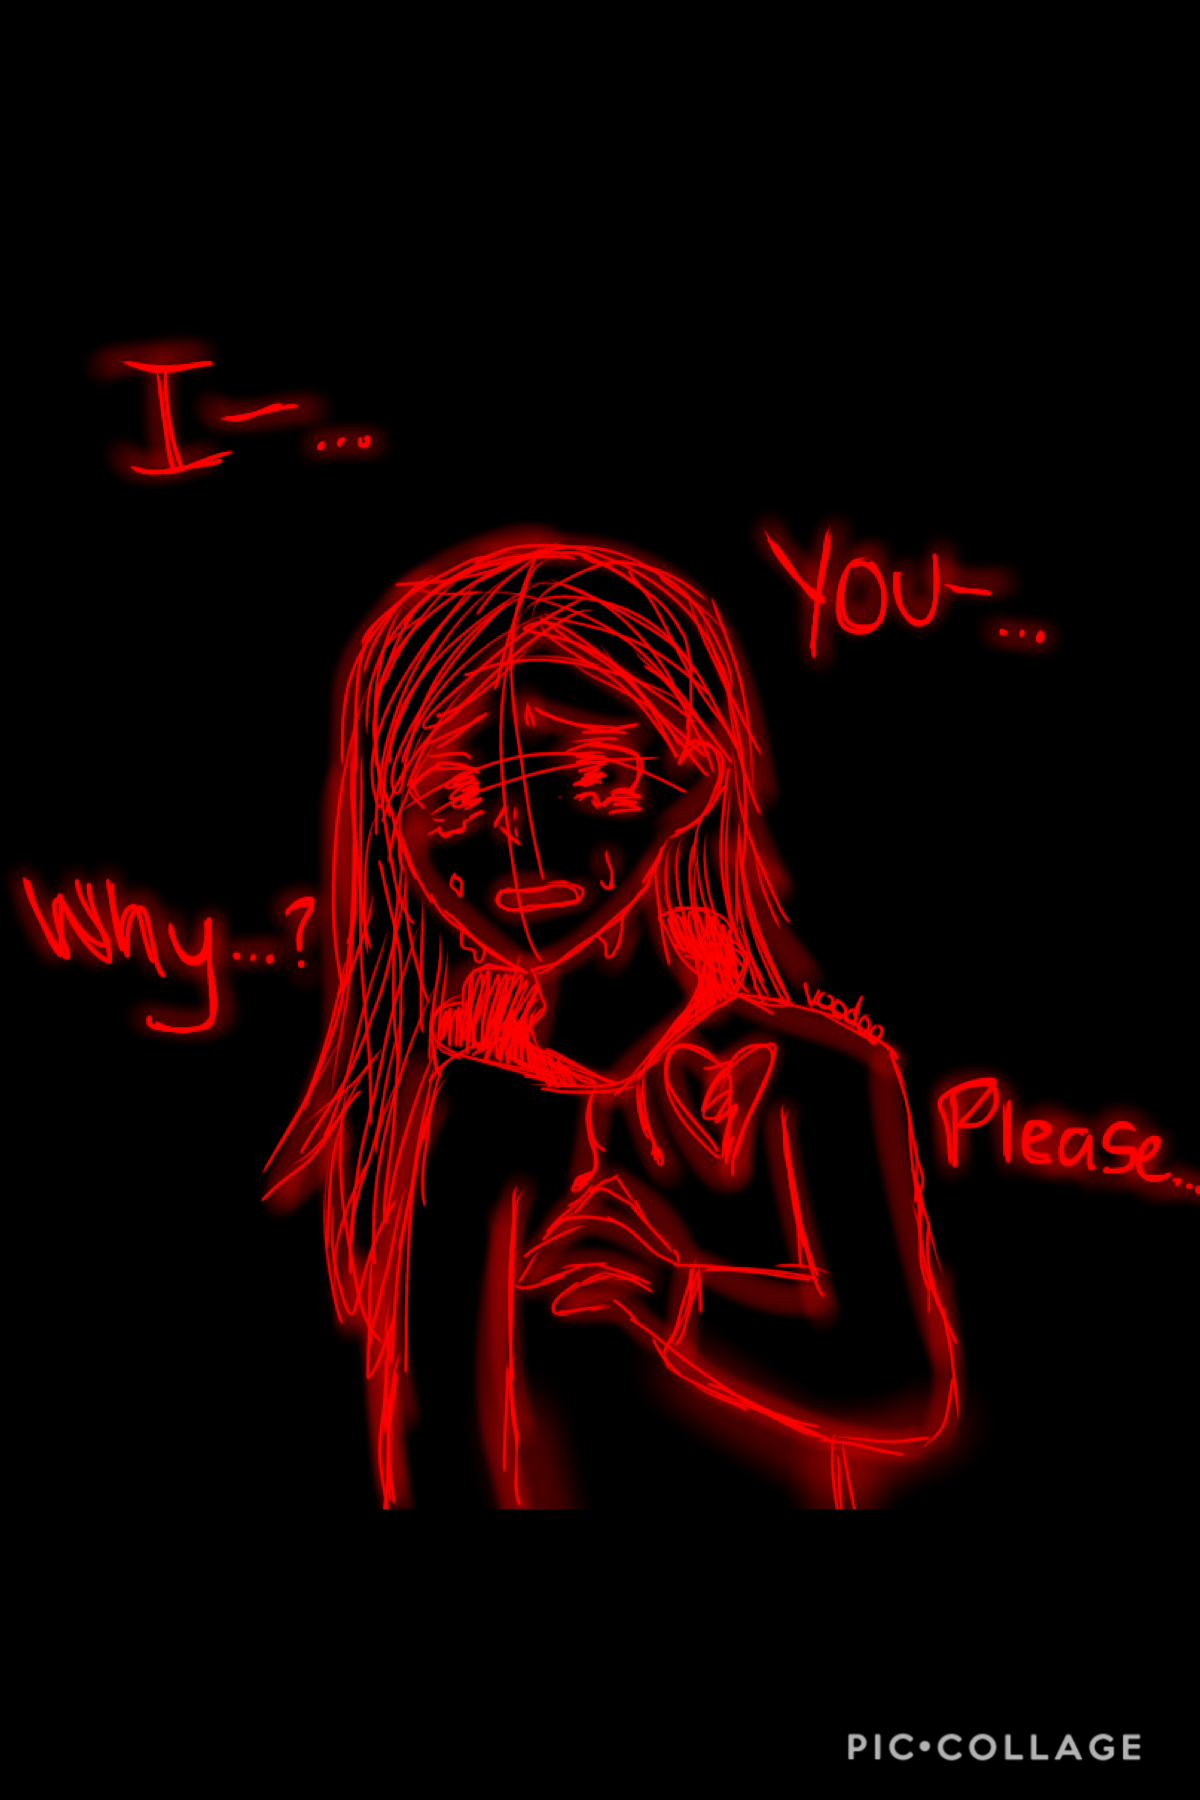 Tap 
A lil piece of vent art I did a few days ago, I’m alright now though, don’t worry, just wanted to share 